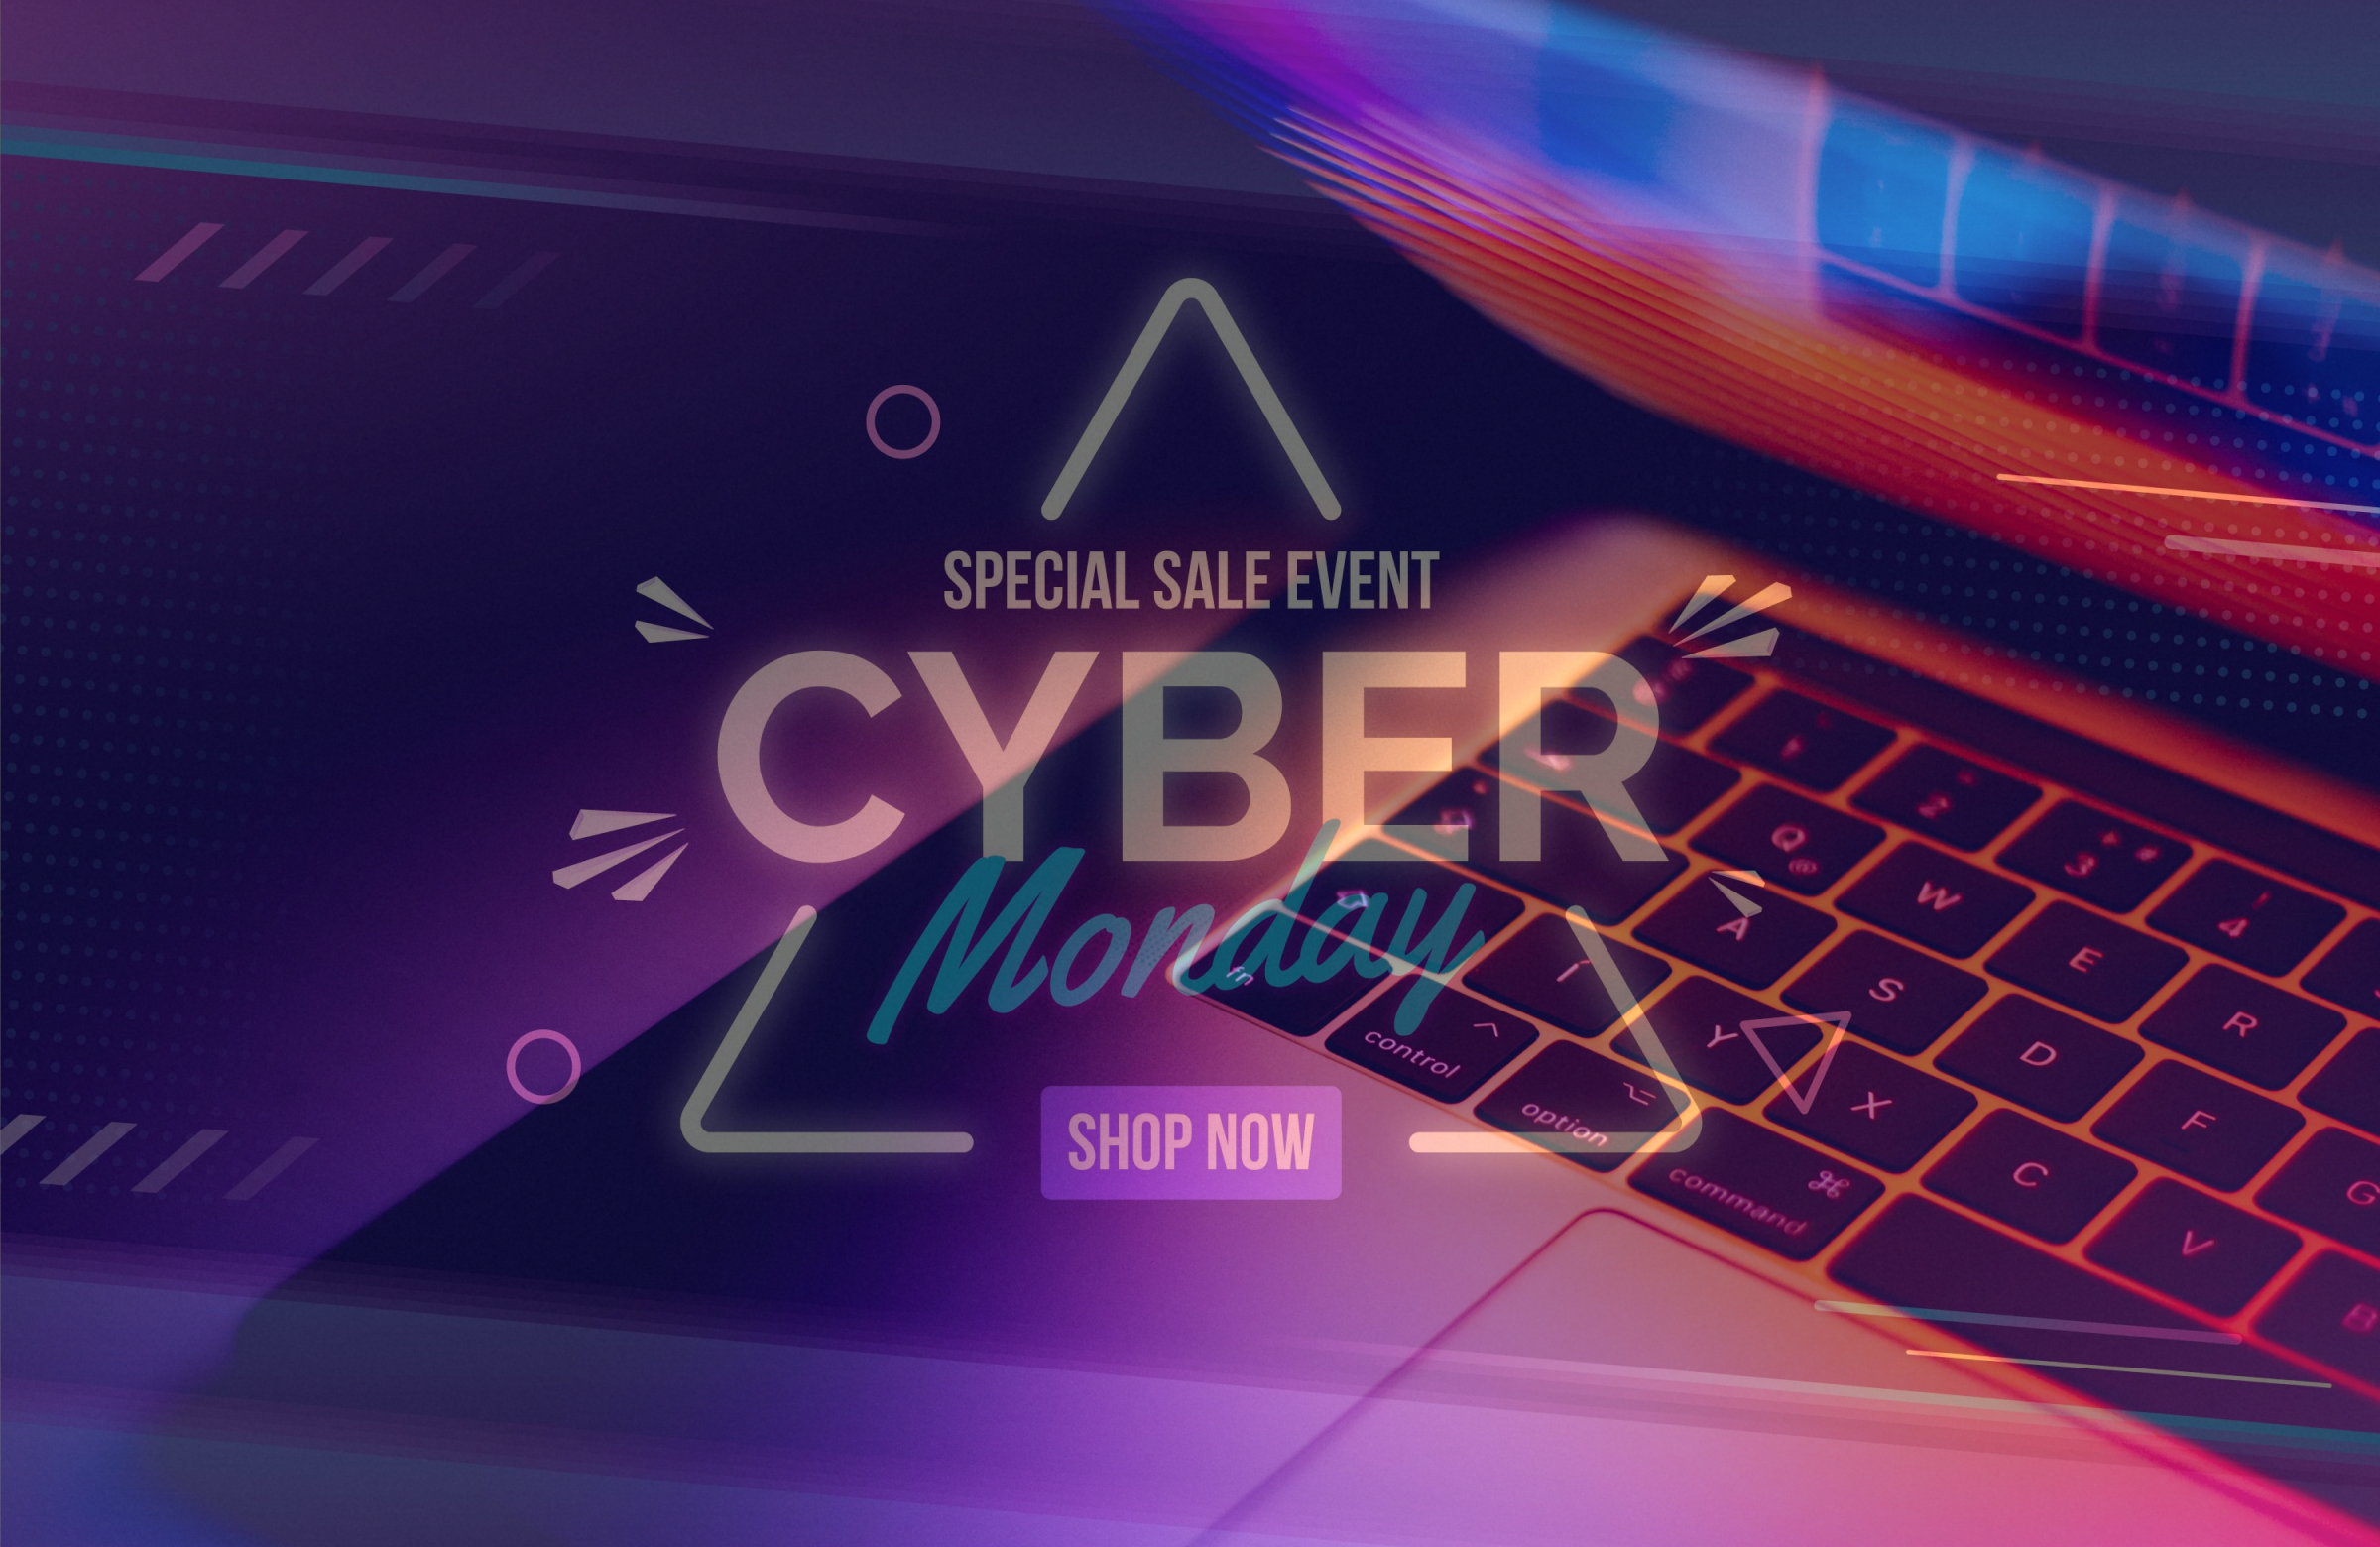 Cyber Monday Laptop Deals - Grab Yours While Stock Lasts